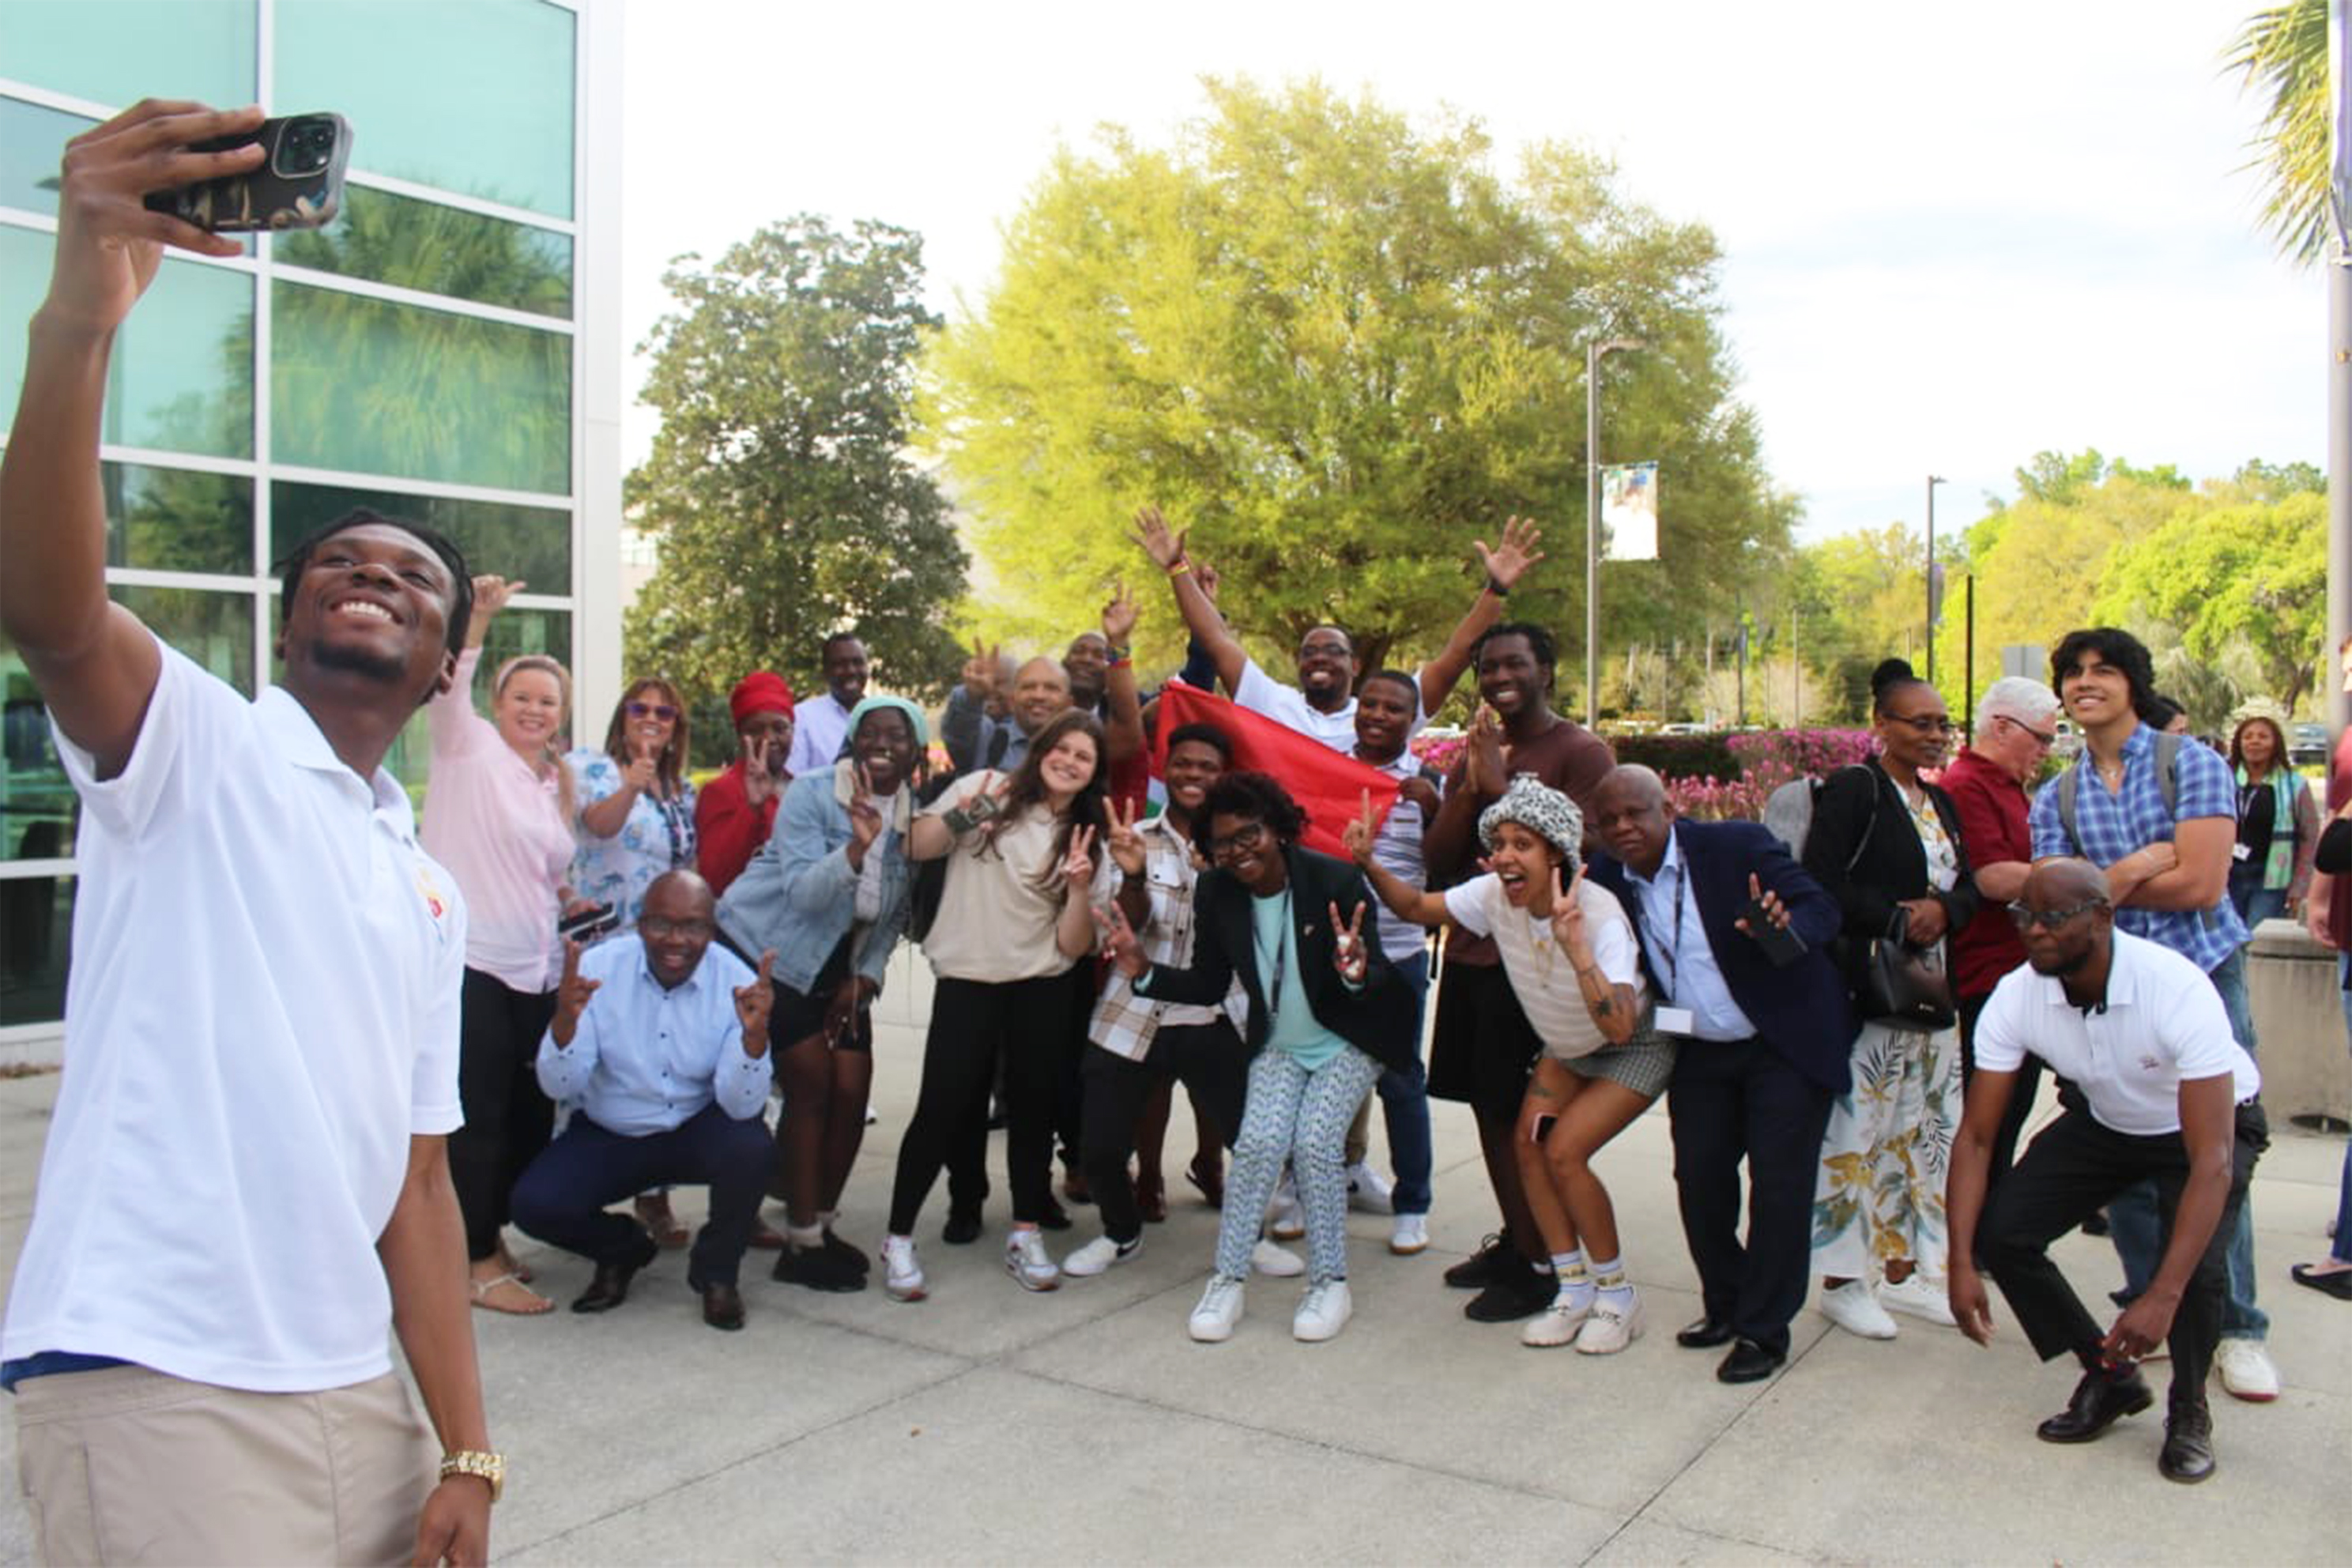 "Members of the CCAP South Africa group taking a selfie outside at Santa Fe College"